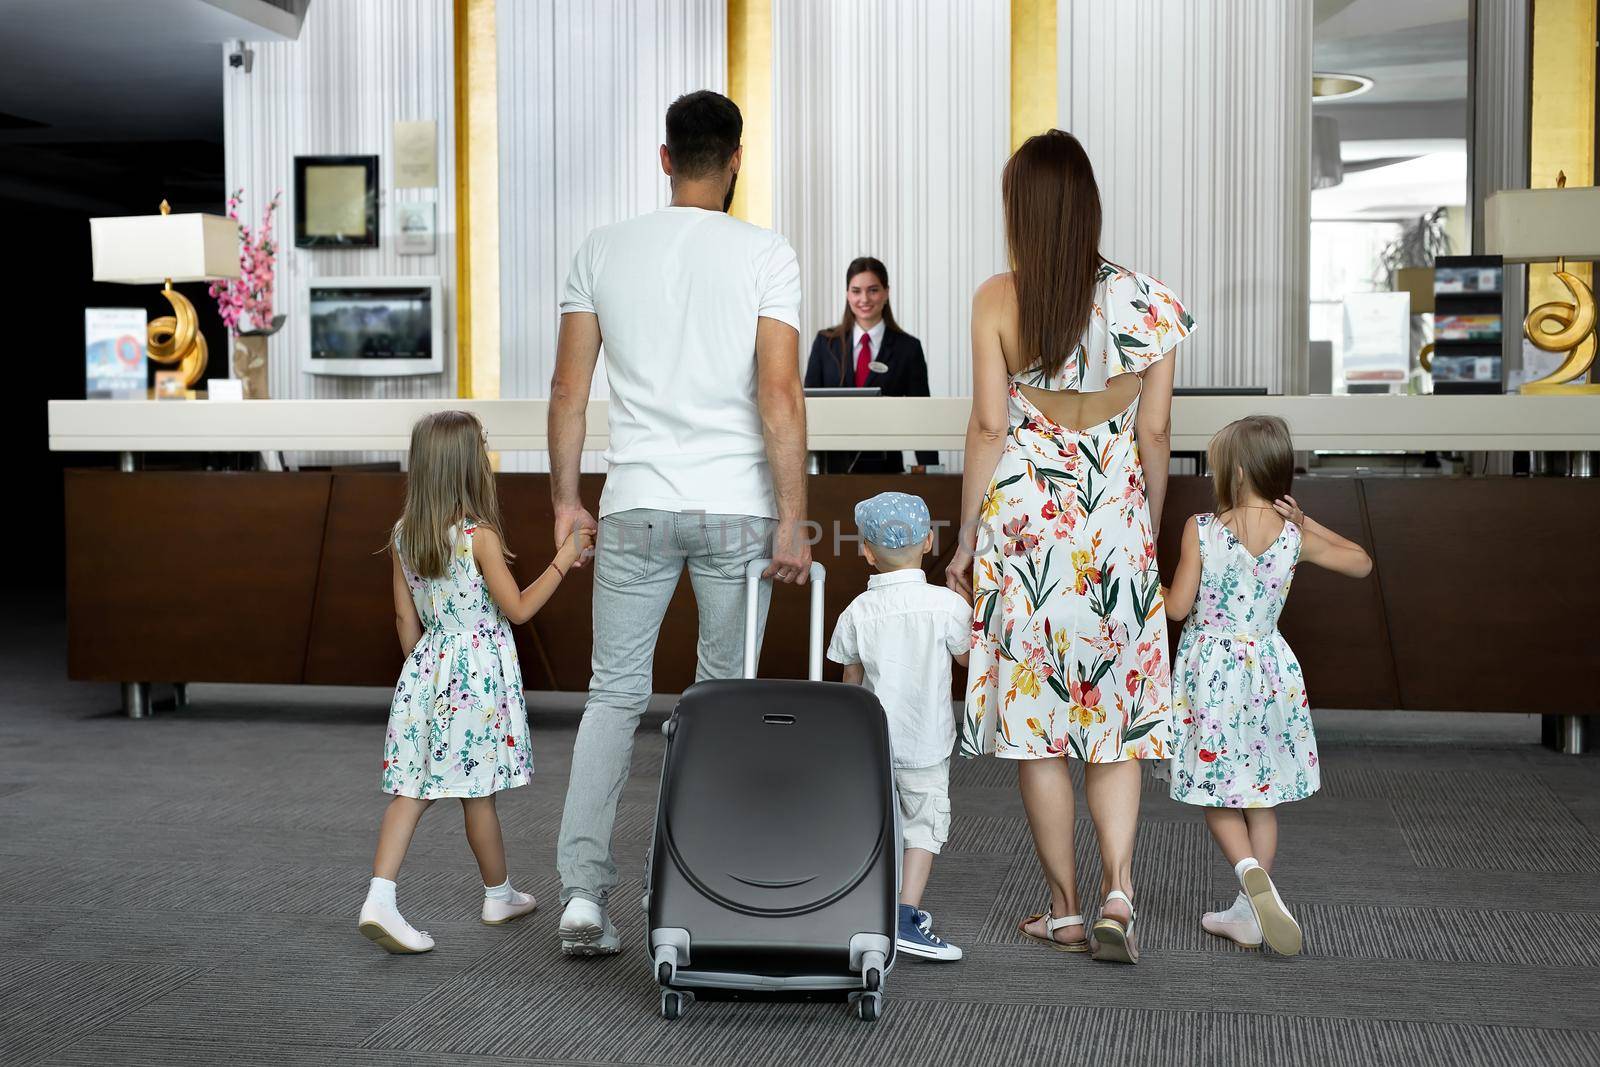 Family of five enters to the hotel lobby to check in at the reception for vacation.